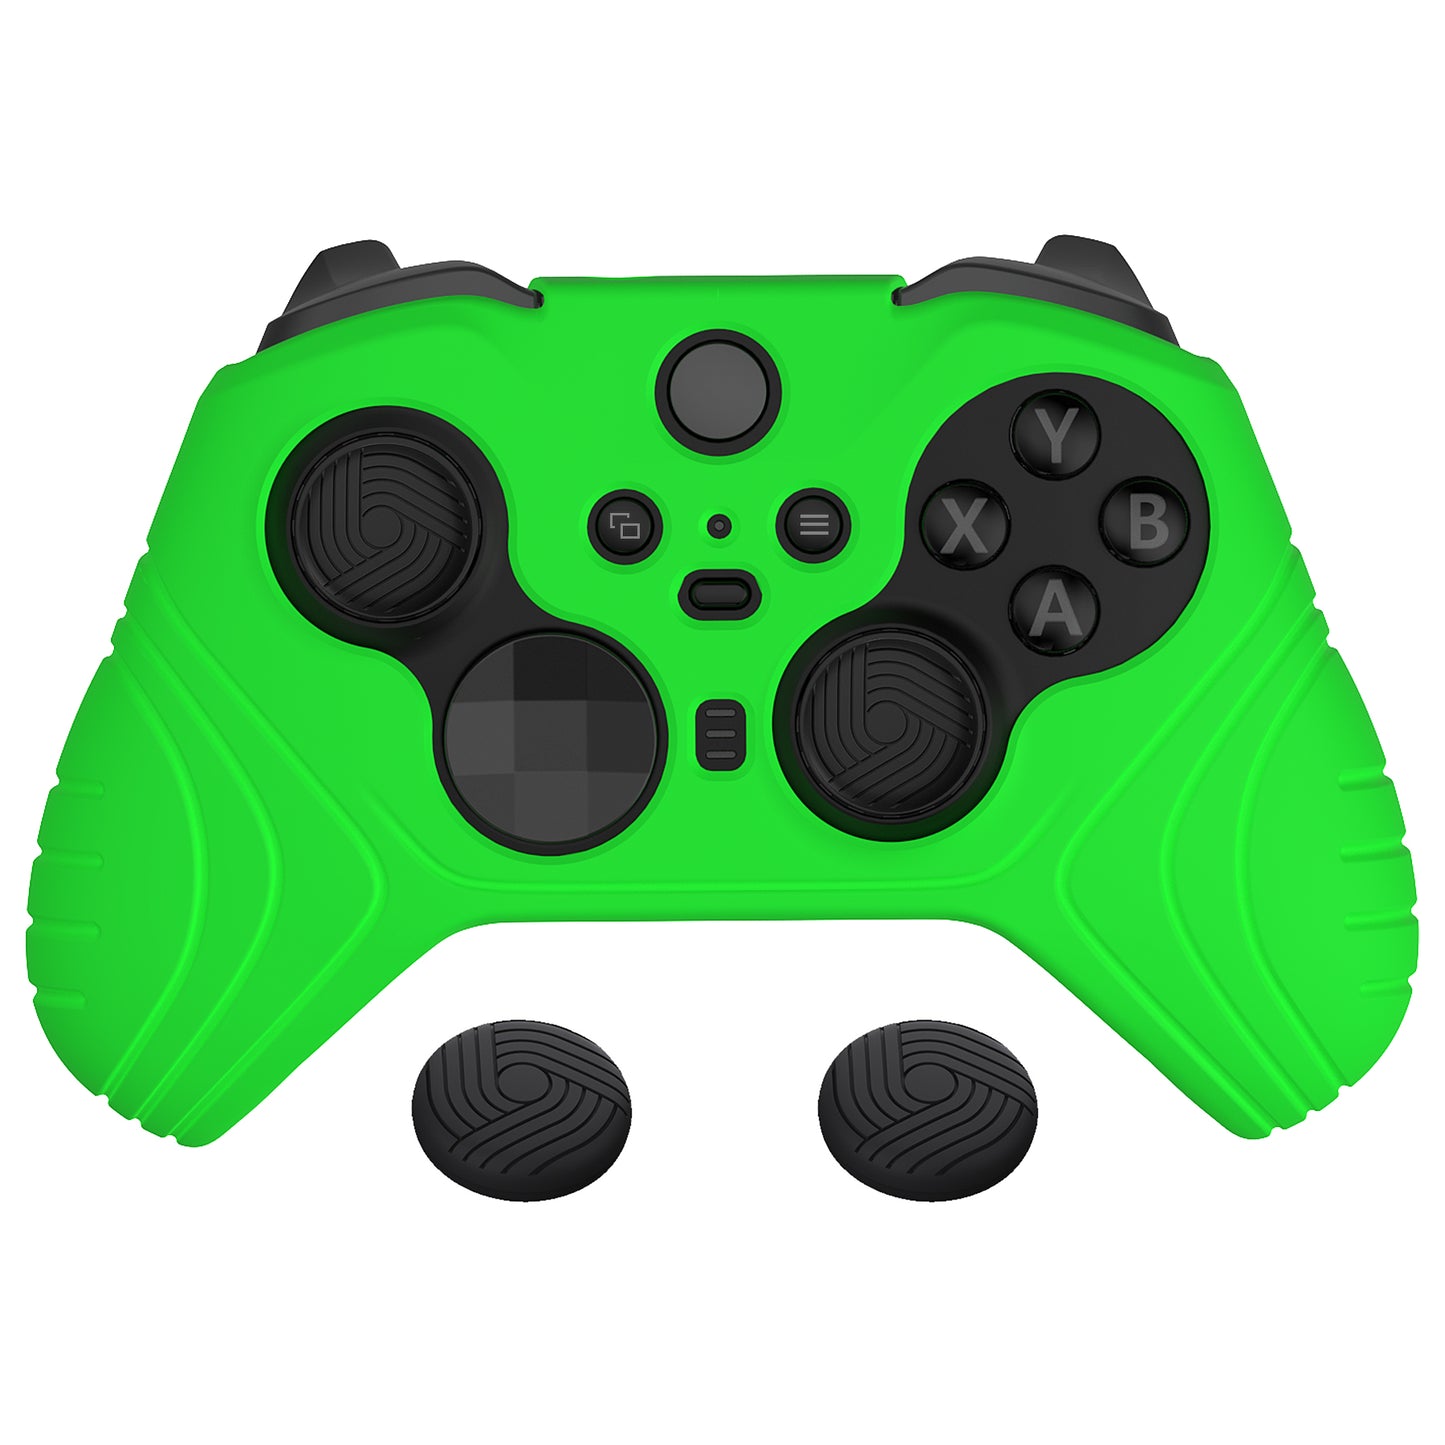 PlayVital Samurai Edition Anti Slip Silicone Case Cover for Xbox Elite Wireless Controller Series 2, Ergonomic Soft Rubber Skin Protector for Xbox Elite Series 2 with Thumb Grip Caps - Green - XBE2M011 playvital